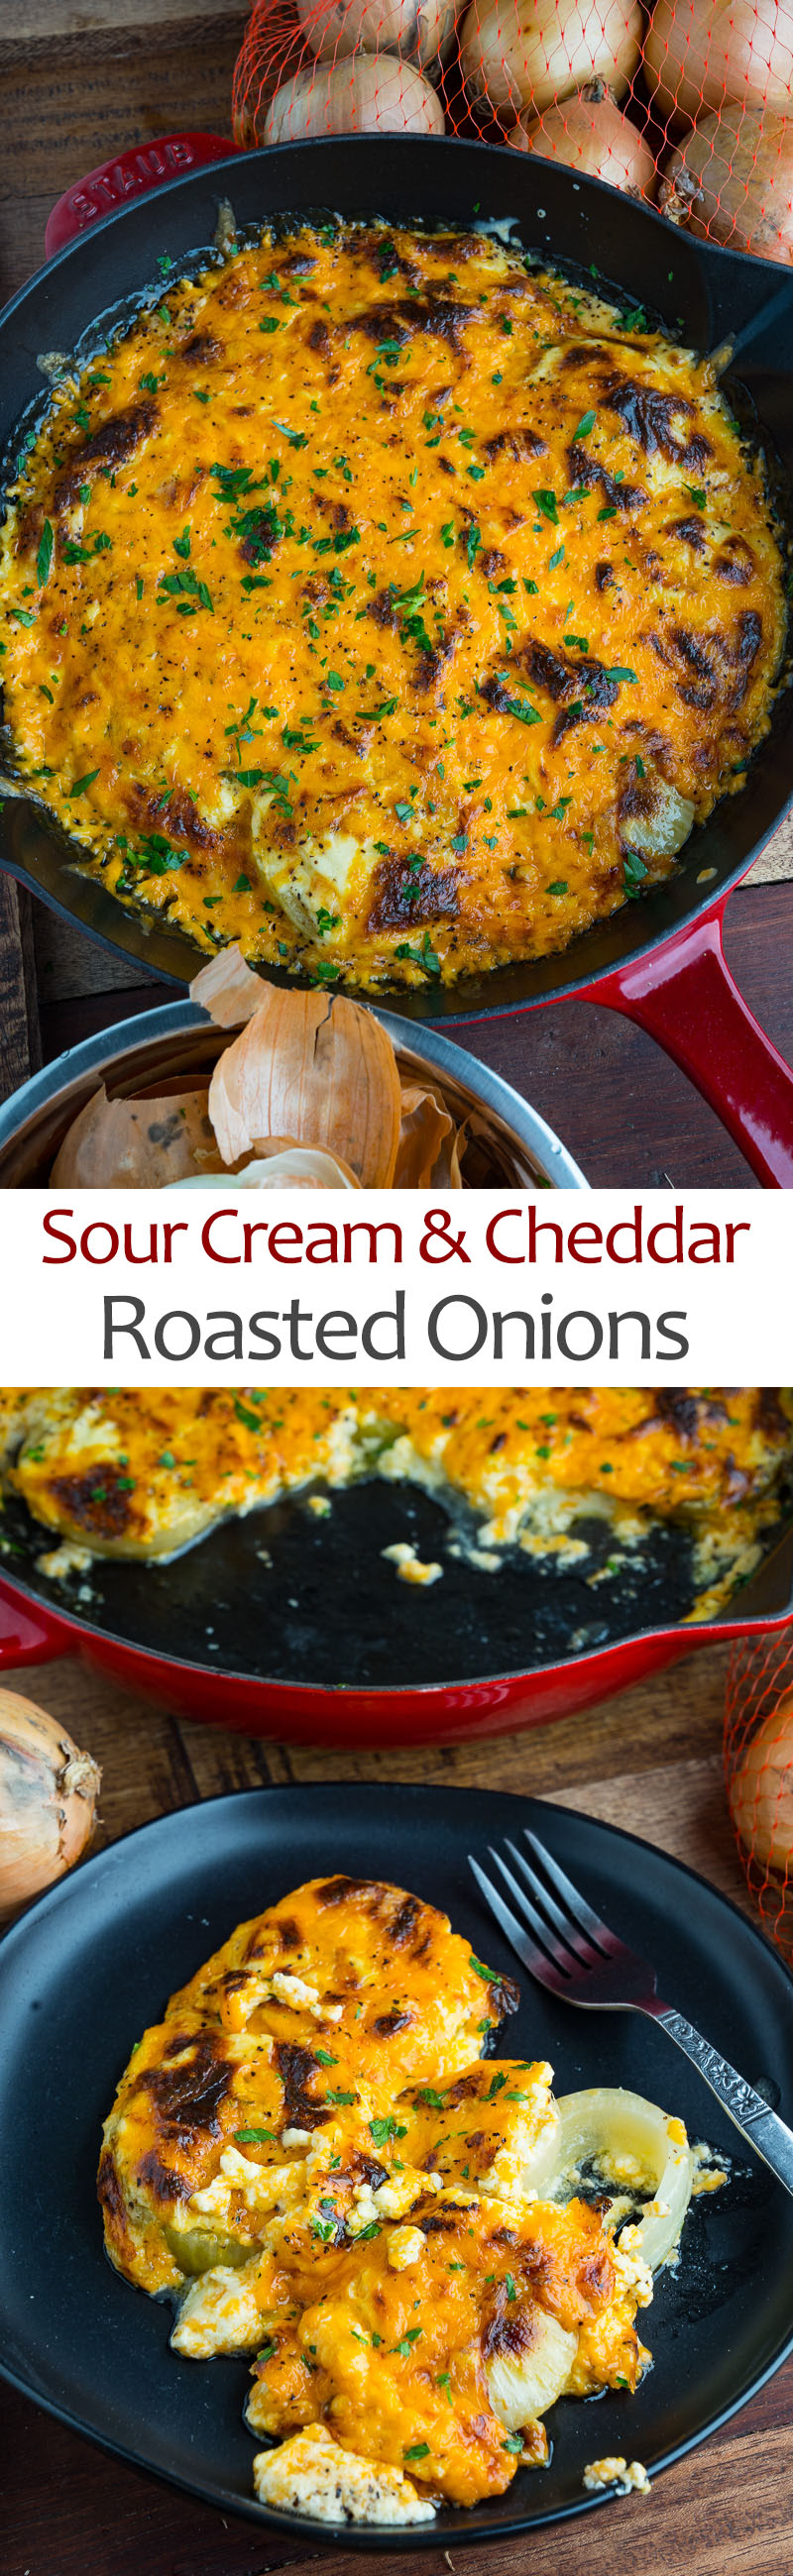 Sour Cream and Cheddar Roasted Onions